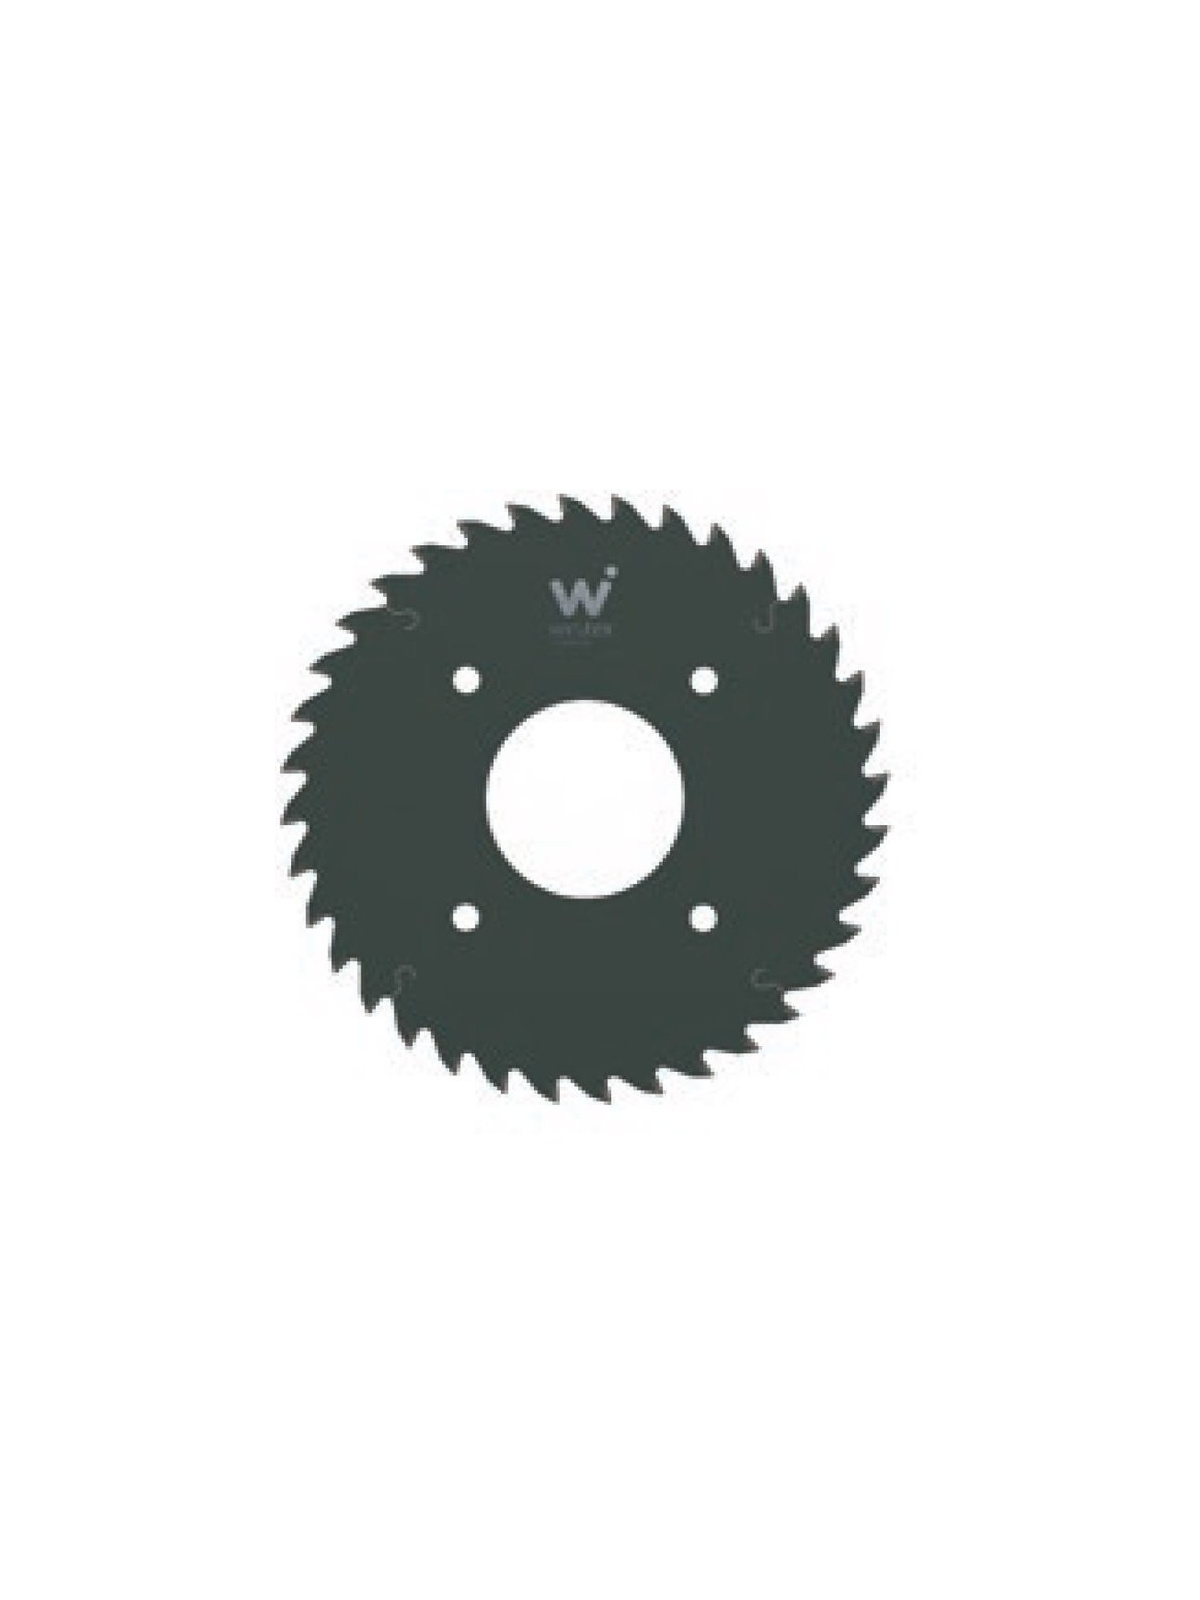 Wirutex Scoring saw blade HM for Biesse Selco D200mm d65mm | JVL-Europe